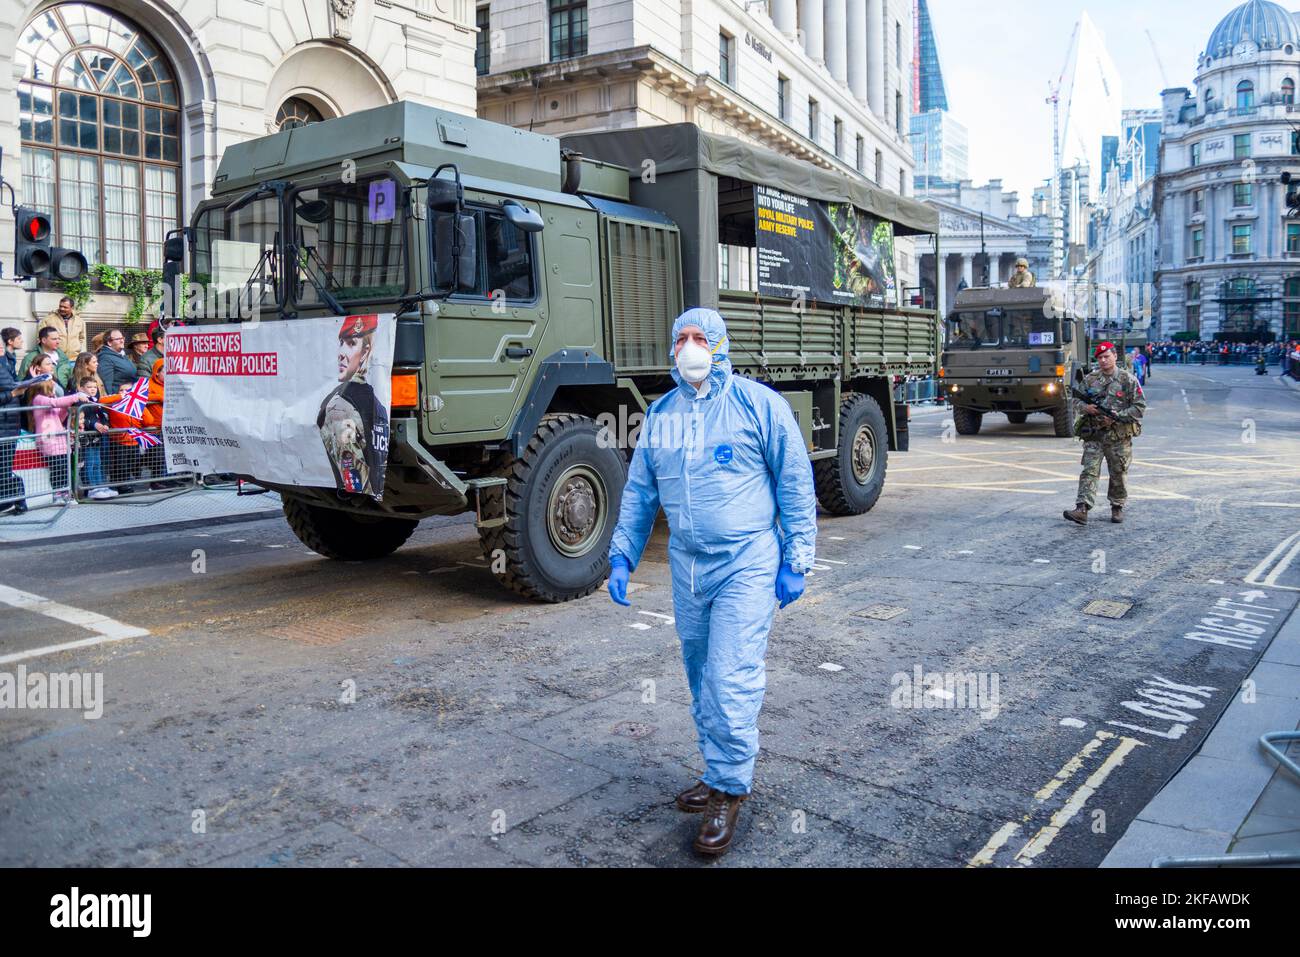 Military Police truck at the Lord Mayor's Show parade in the City of London, UK. 3rd Regiment Royal Military Police. Scenes of crime overalls, mask Stock Photo